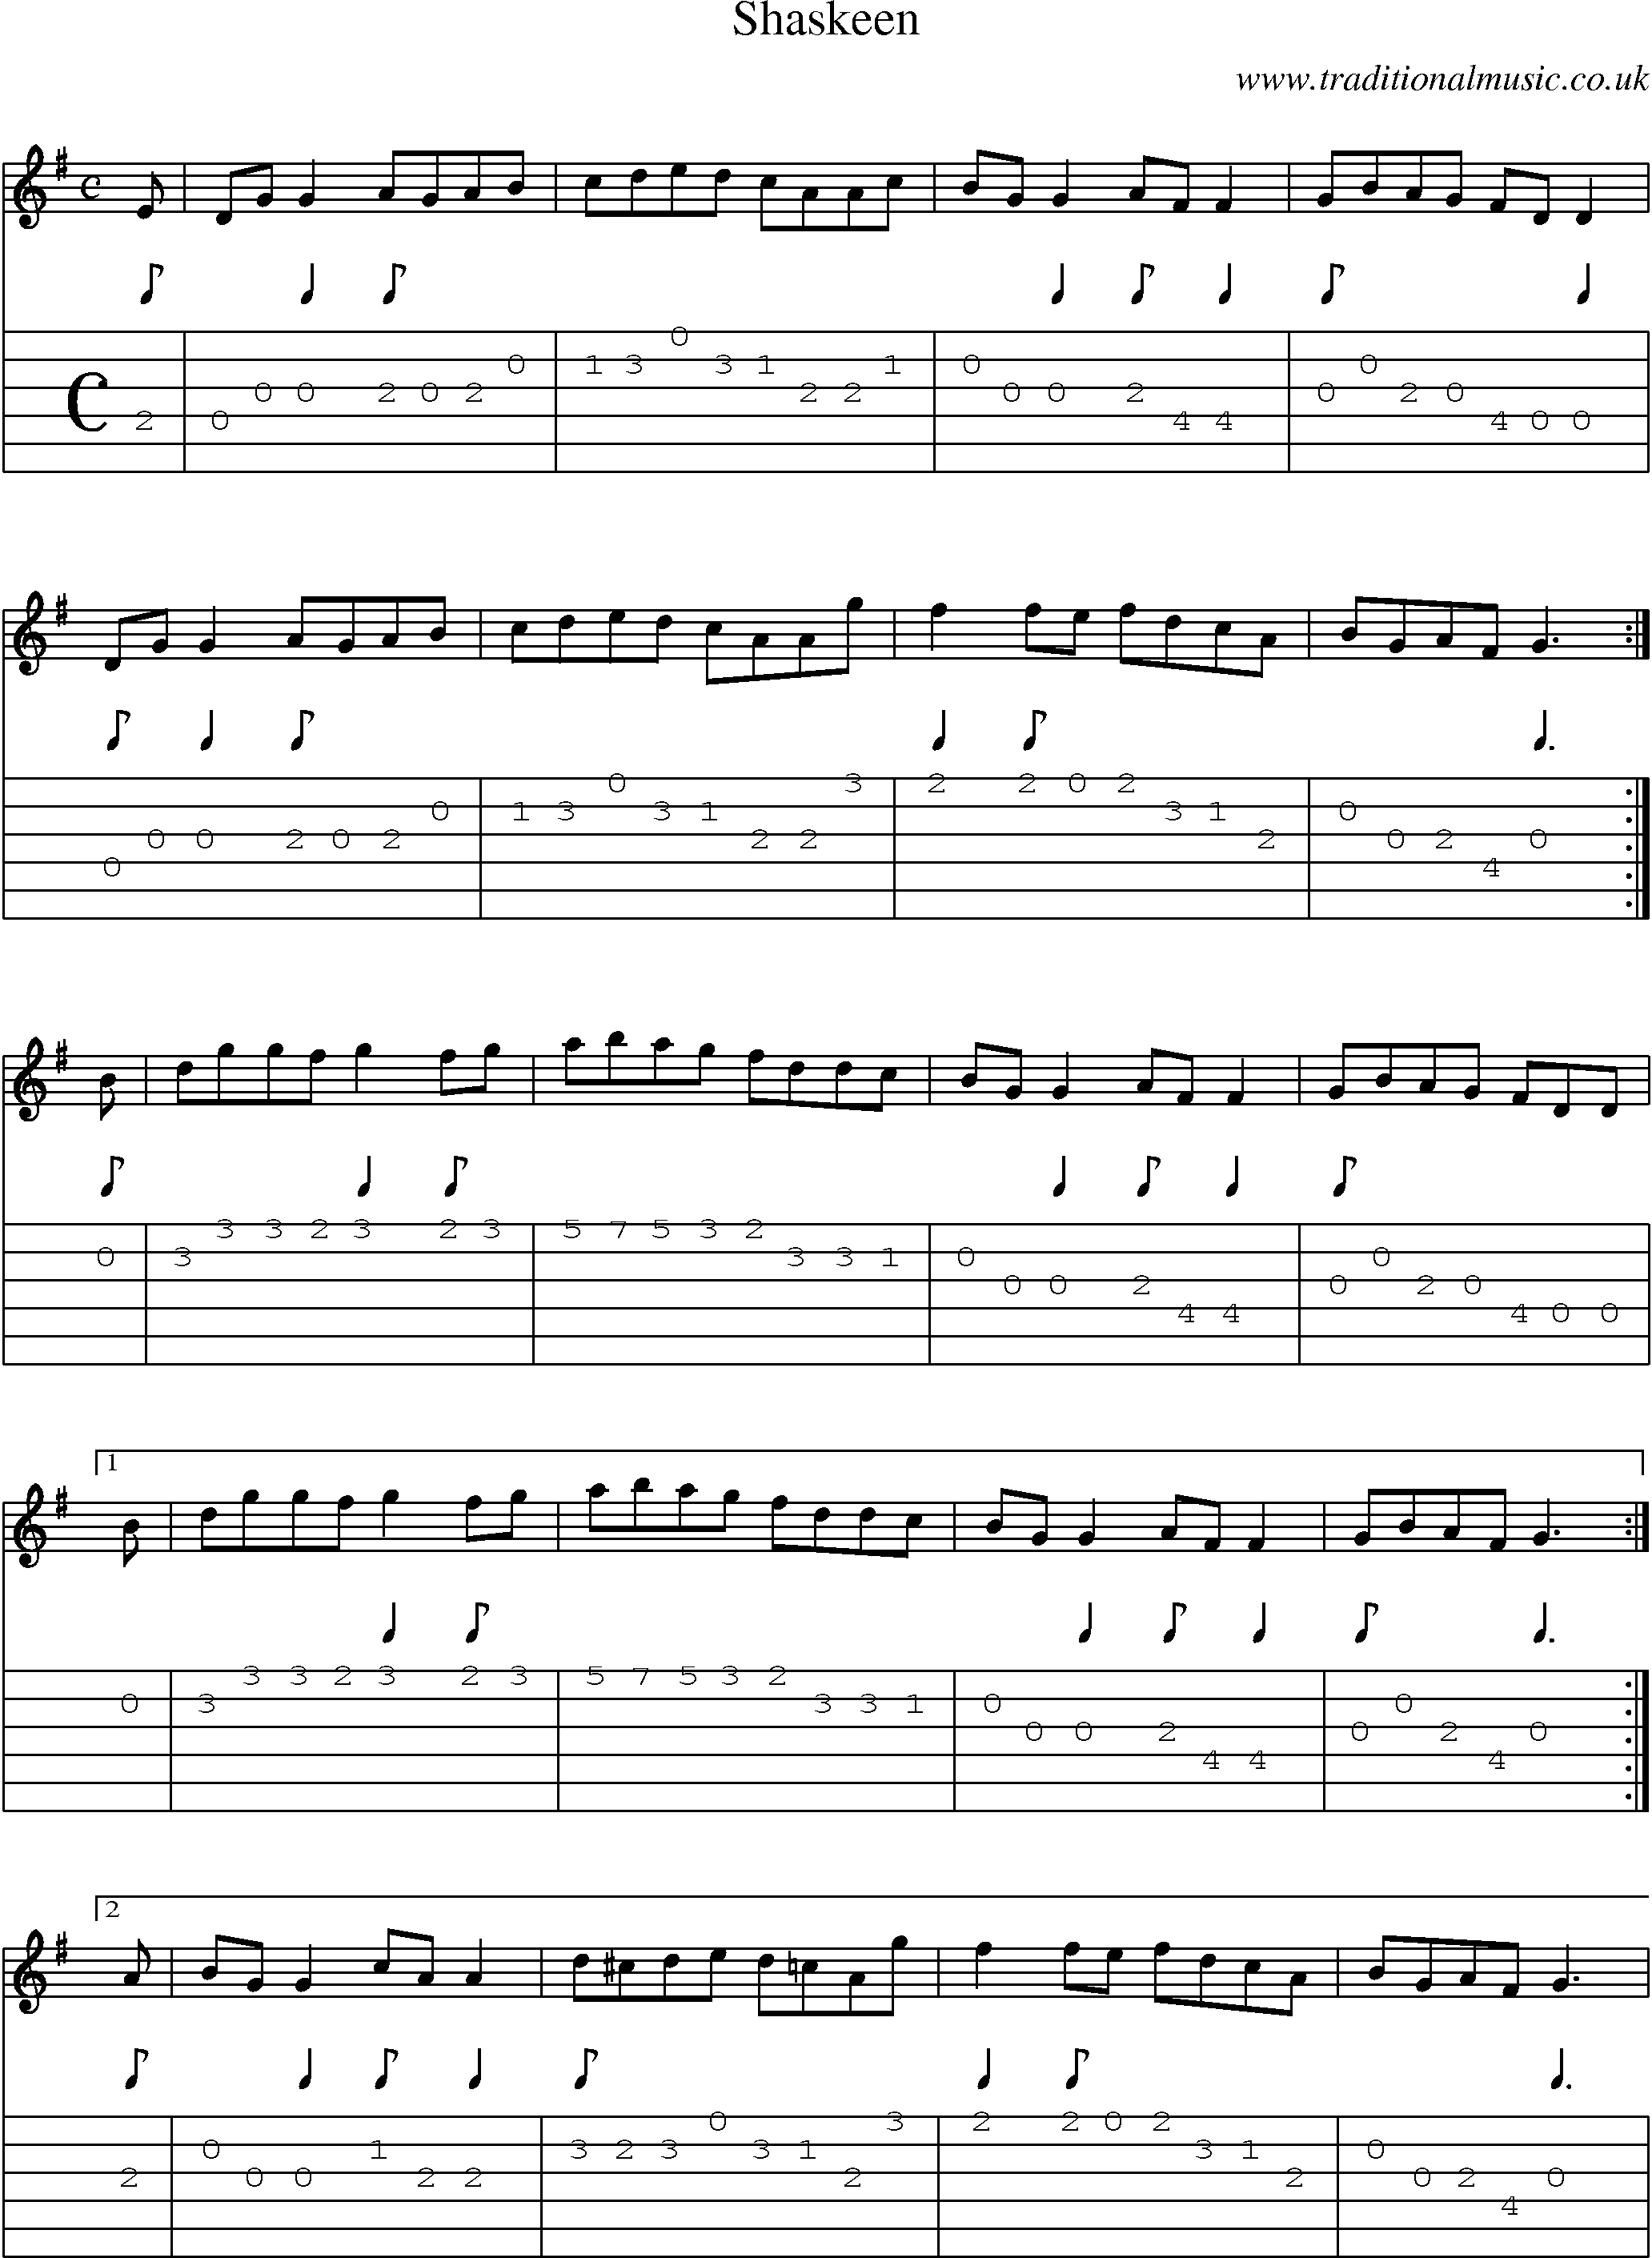 Music Score and Guitar Tabs for Shaskeen